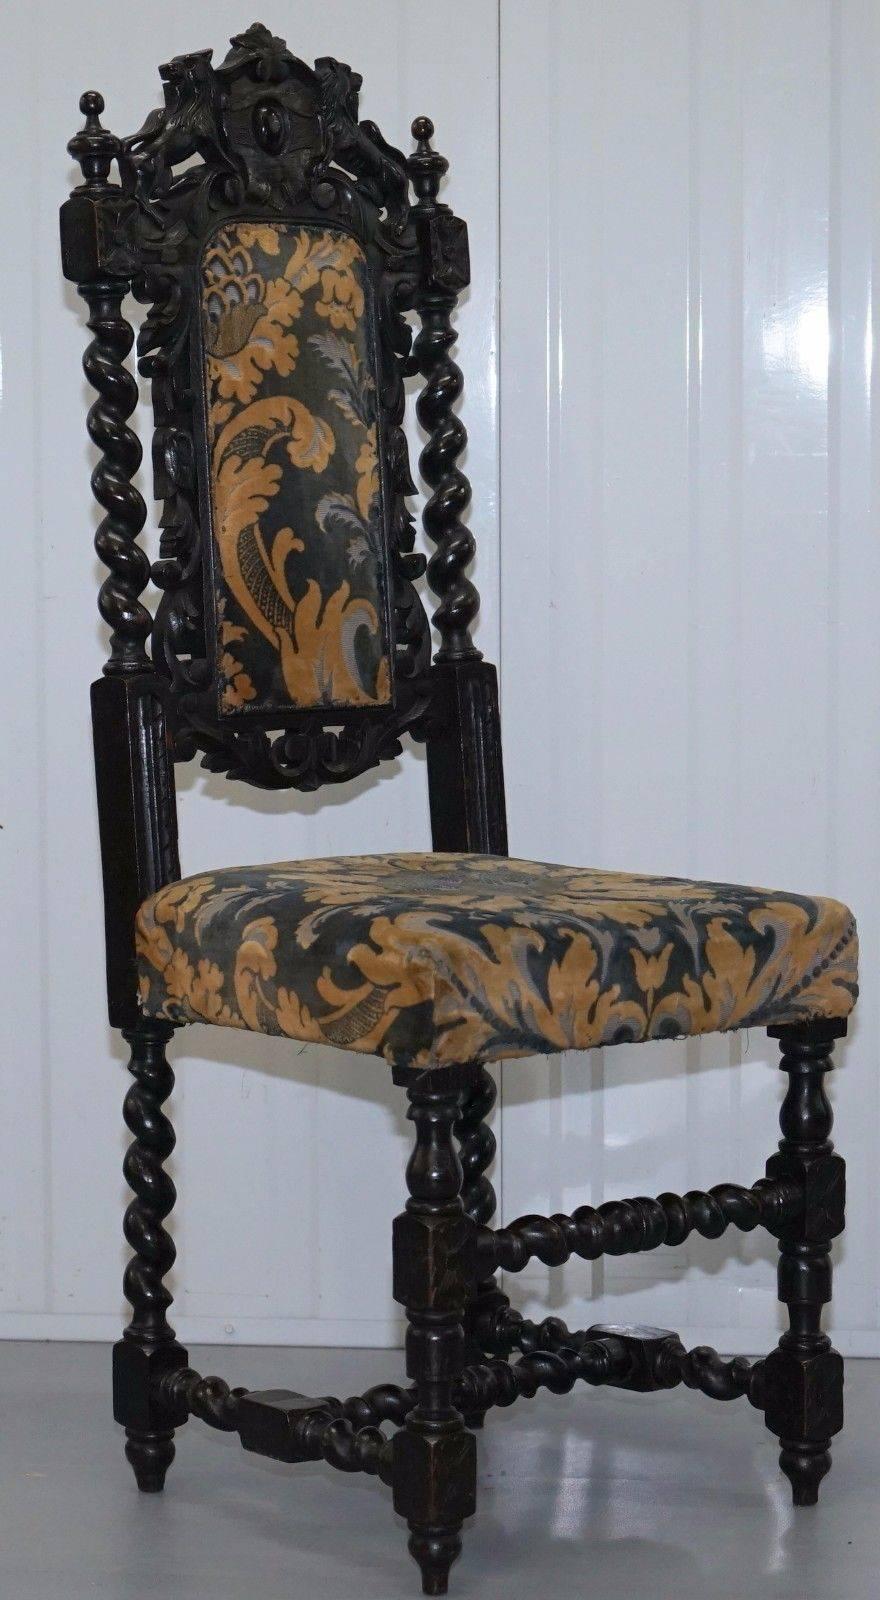 Wimbledon-Furniture

Wimbledon-Furniture is delighted to offer for sale this lovely set of 6 original Gothic / Jacobean hand carved ebonised throne armchairs

Please scroll all the way to the bottom of the description for multiple supersized